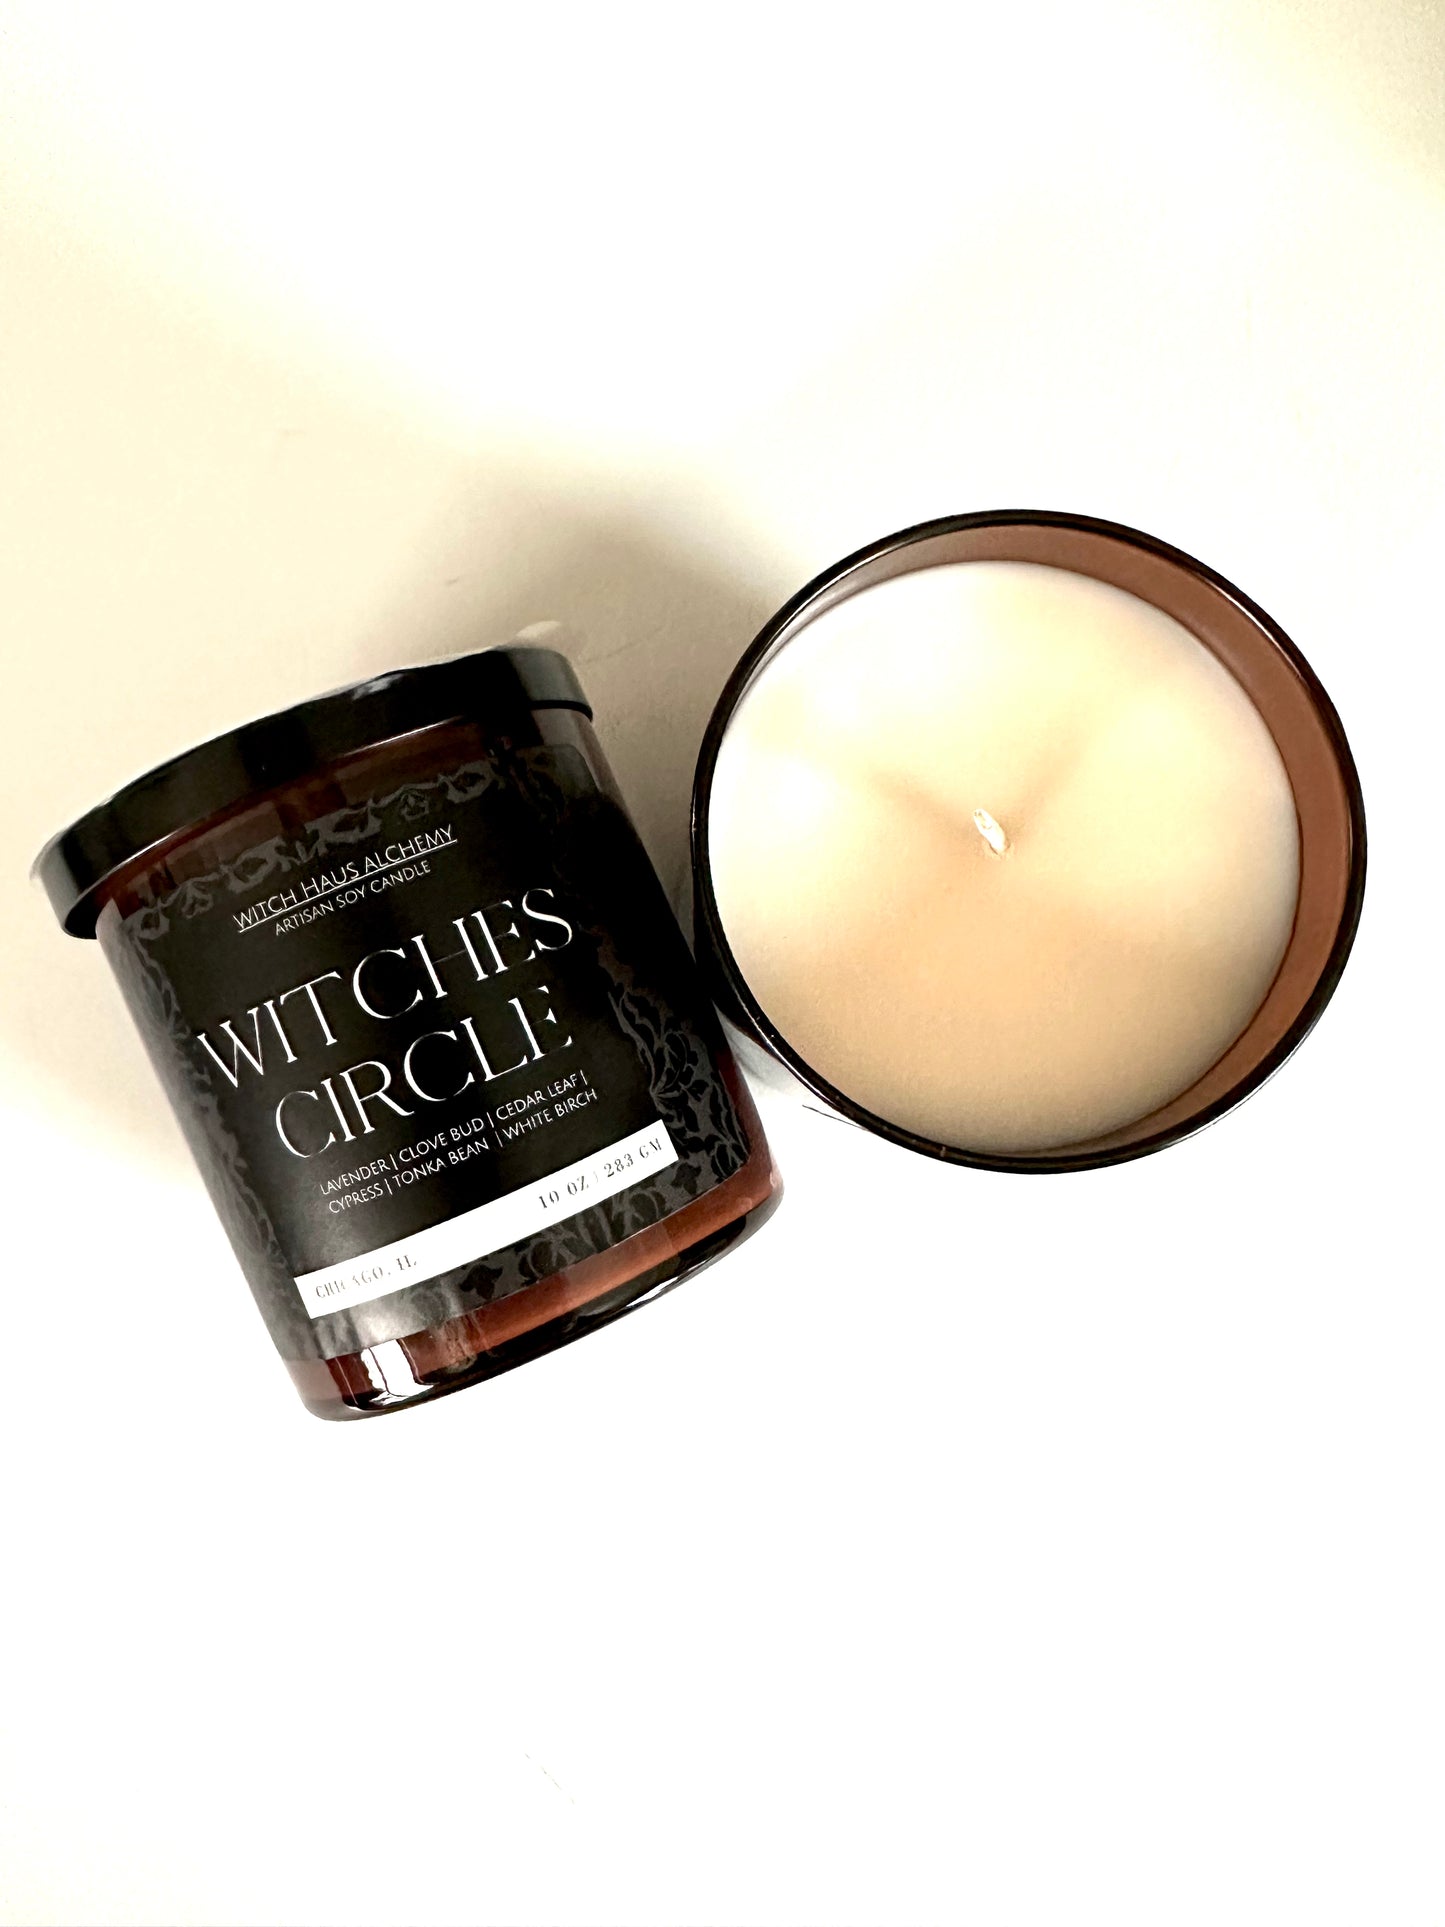 Witches Circle | 10 oz Candle